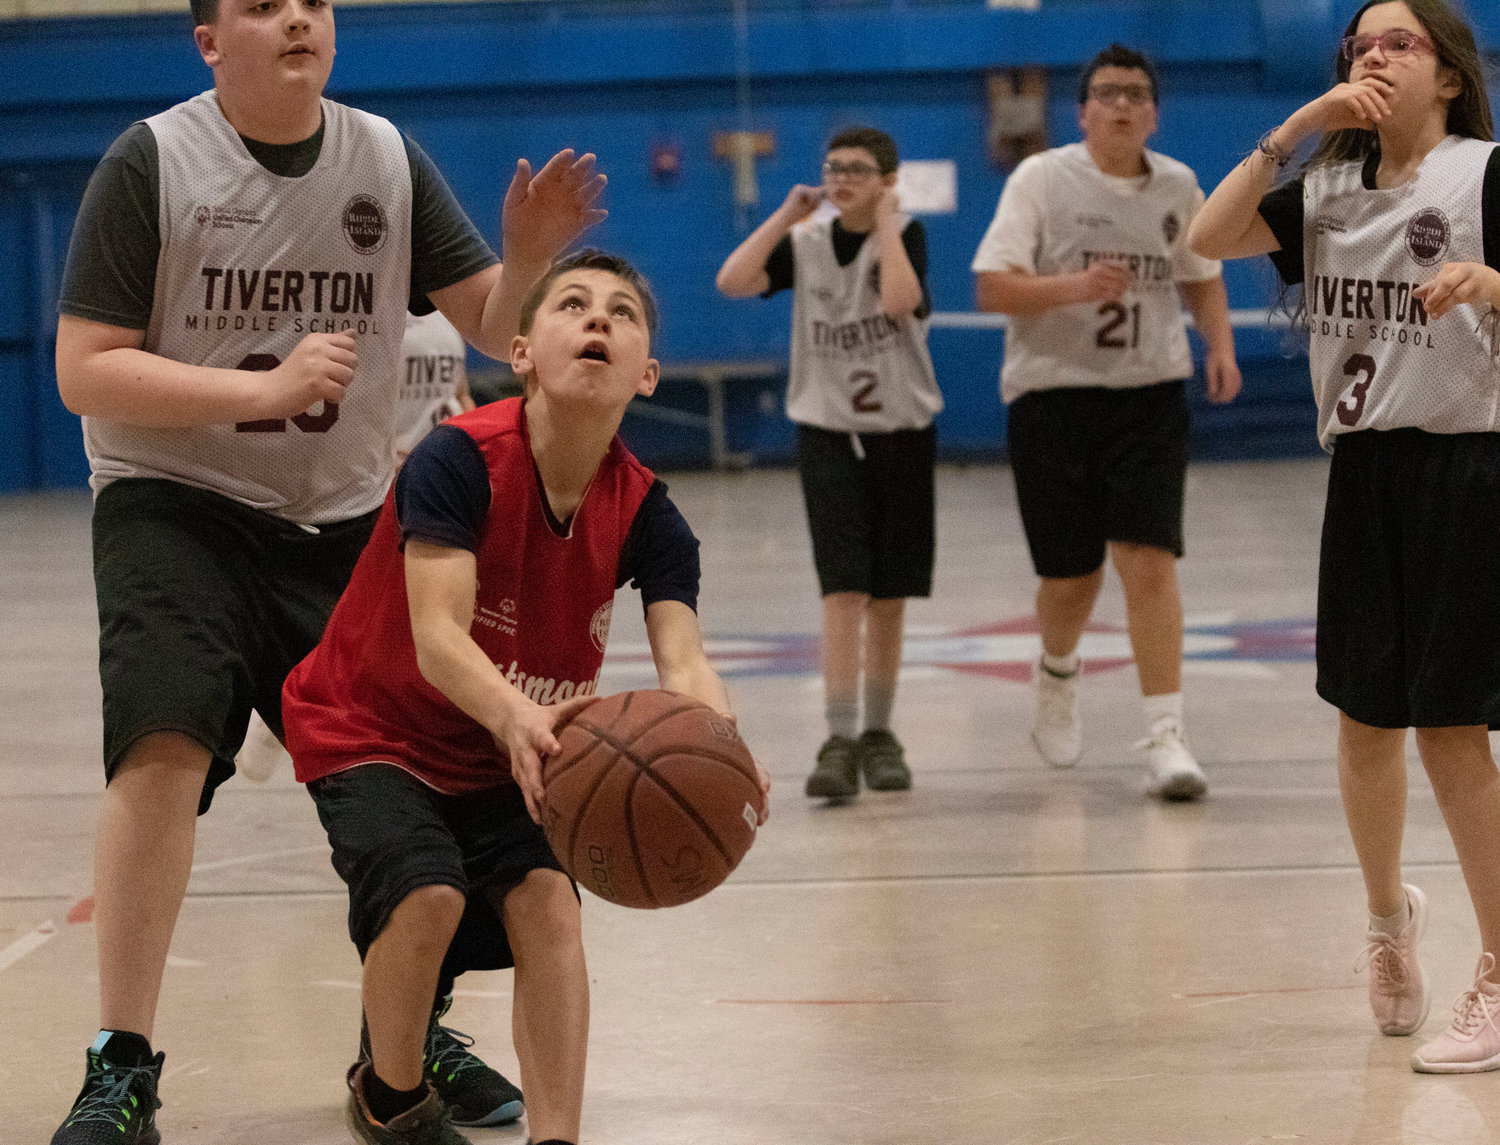 Alex Silva of the Portsmouth Middle School unified basketball team prepares to sink a jumper right before the final buzzer to give his team a 32-30 victory over Tiverton on Tuesday afternoon at home.